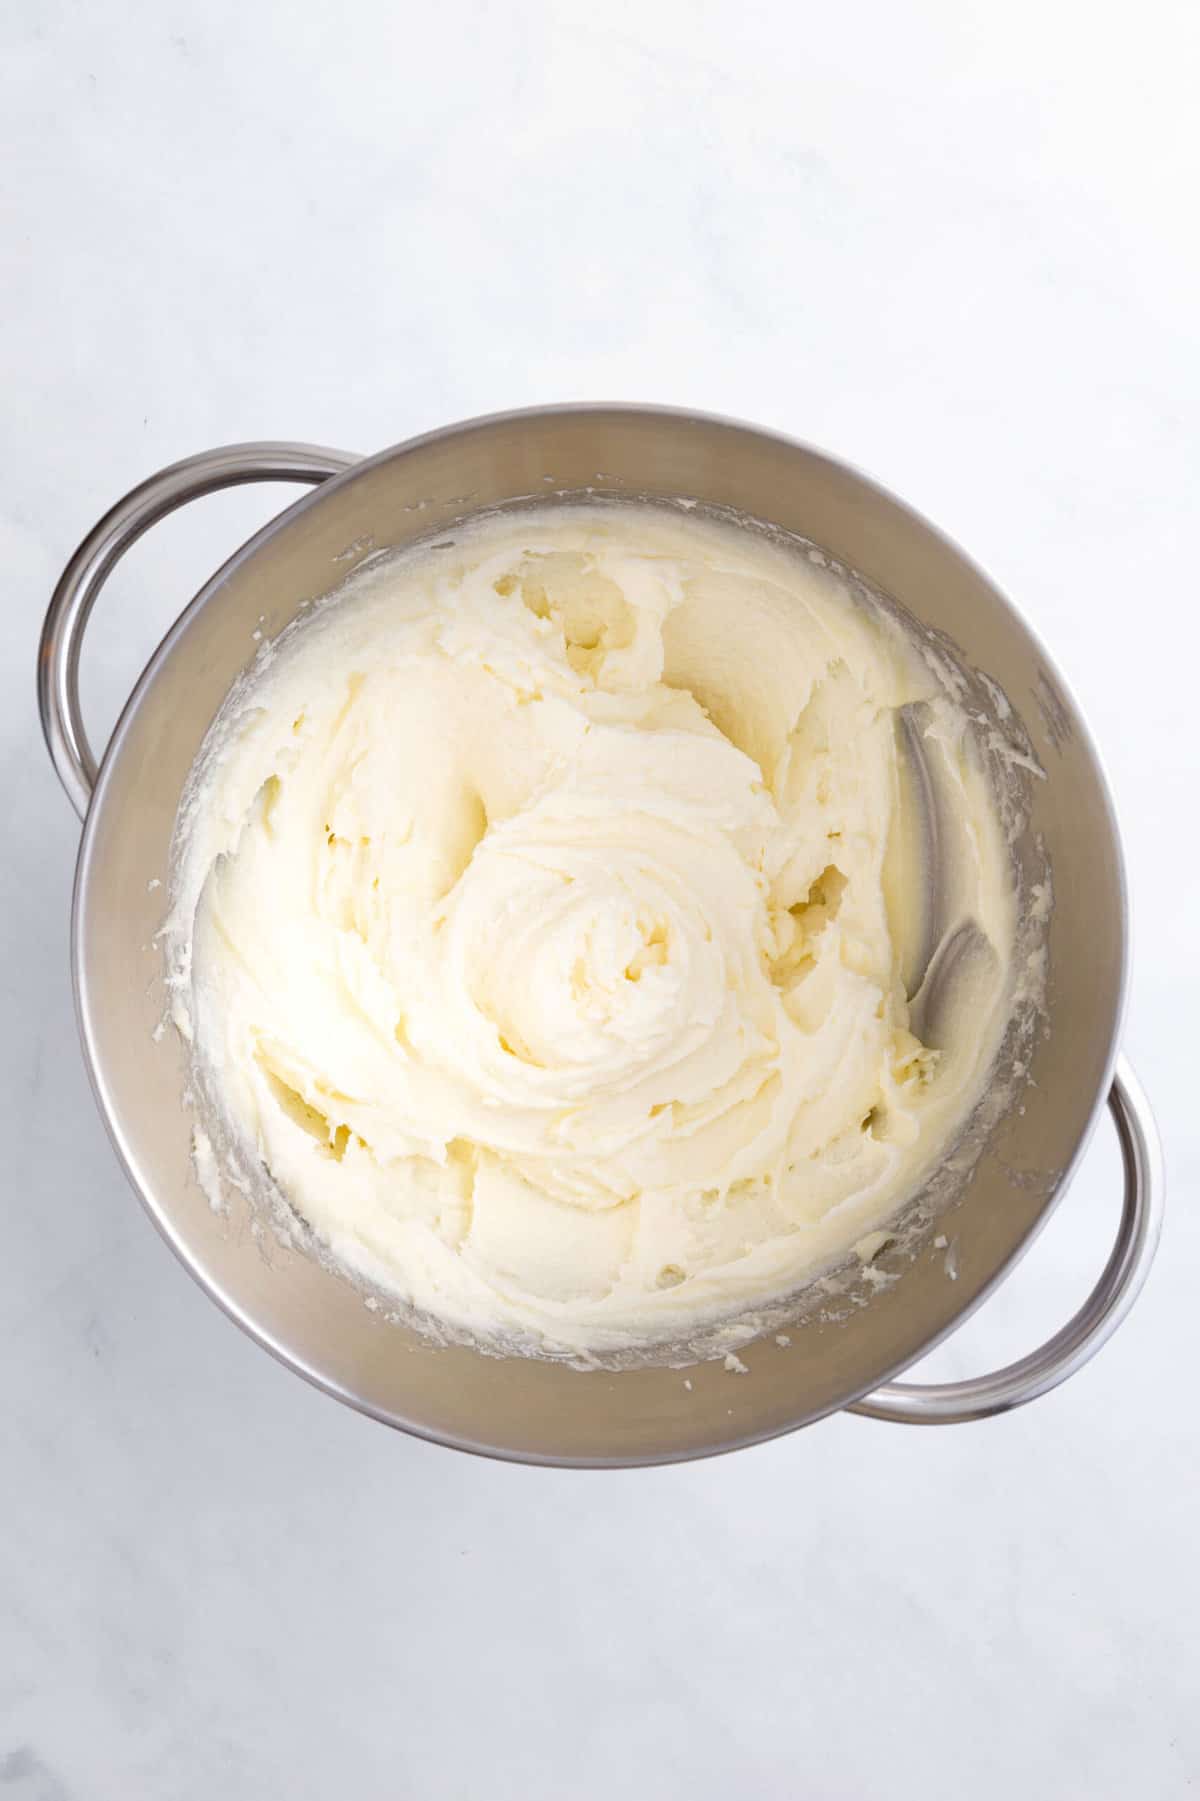 cream cheese pound cake ingredients in a stainless steel mixing bowl